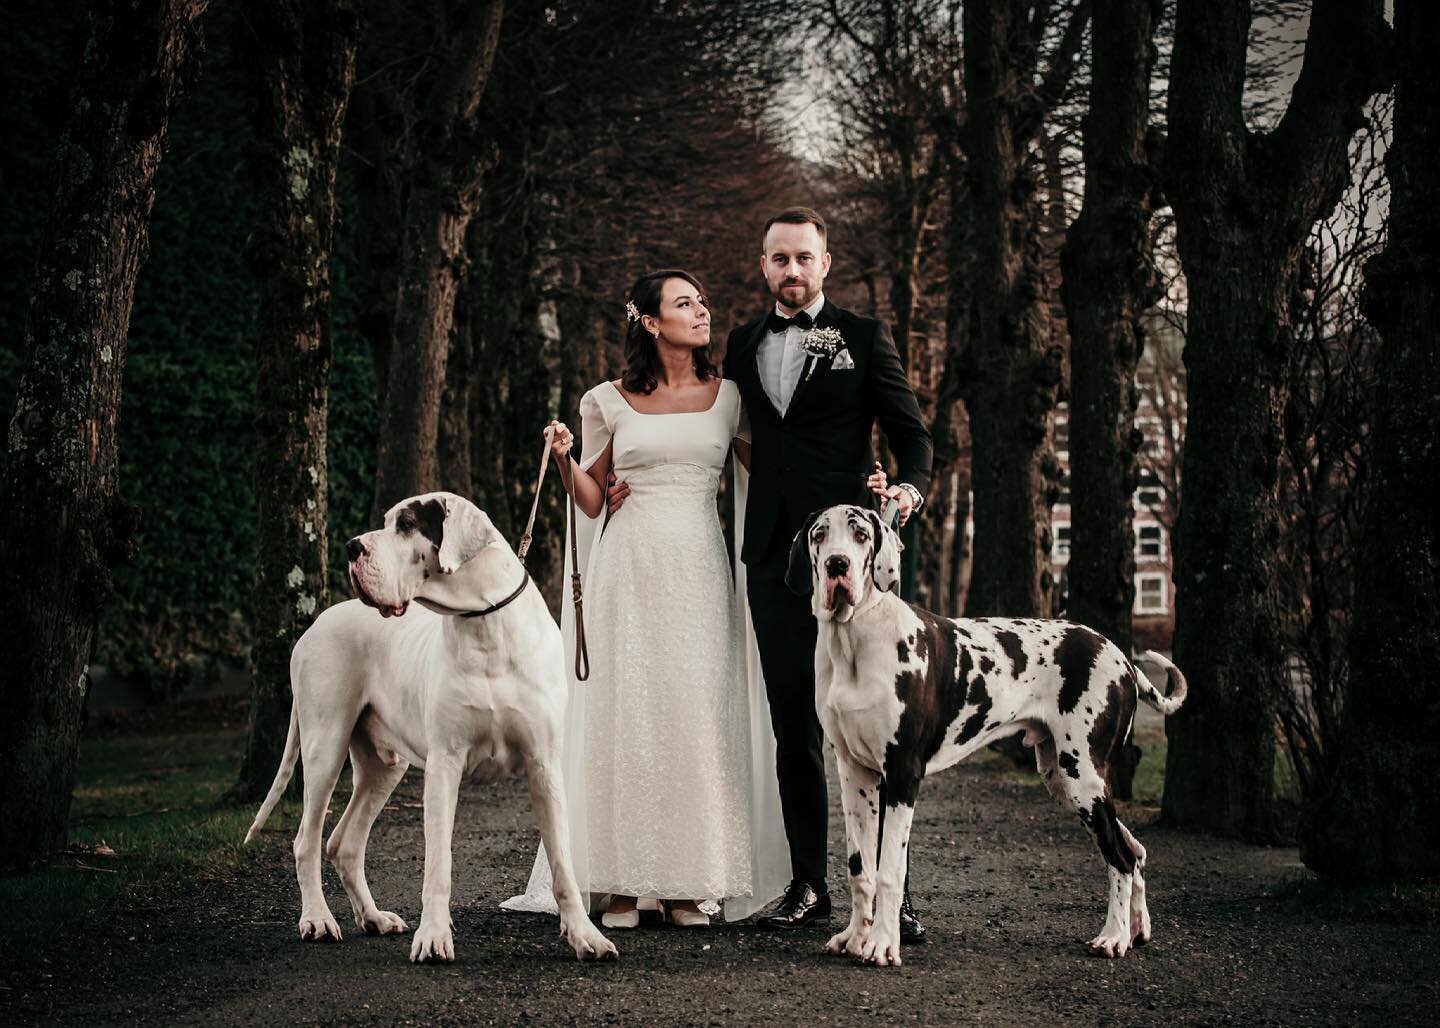 Maria + Kristian 🖤

This day was so perfect and just full of surprises.
Not only was the weather perfect, but as we were taking the formal photos these beautiful and majestic dogs came walking by. The lovely owners let us hang out with them for a fe